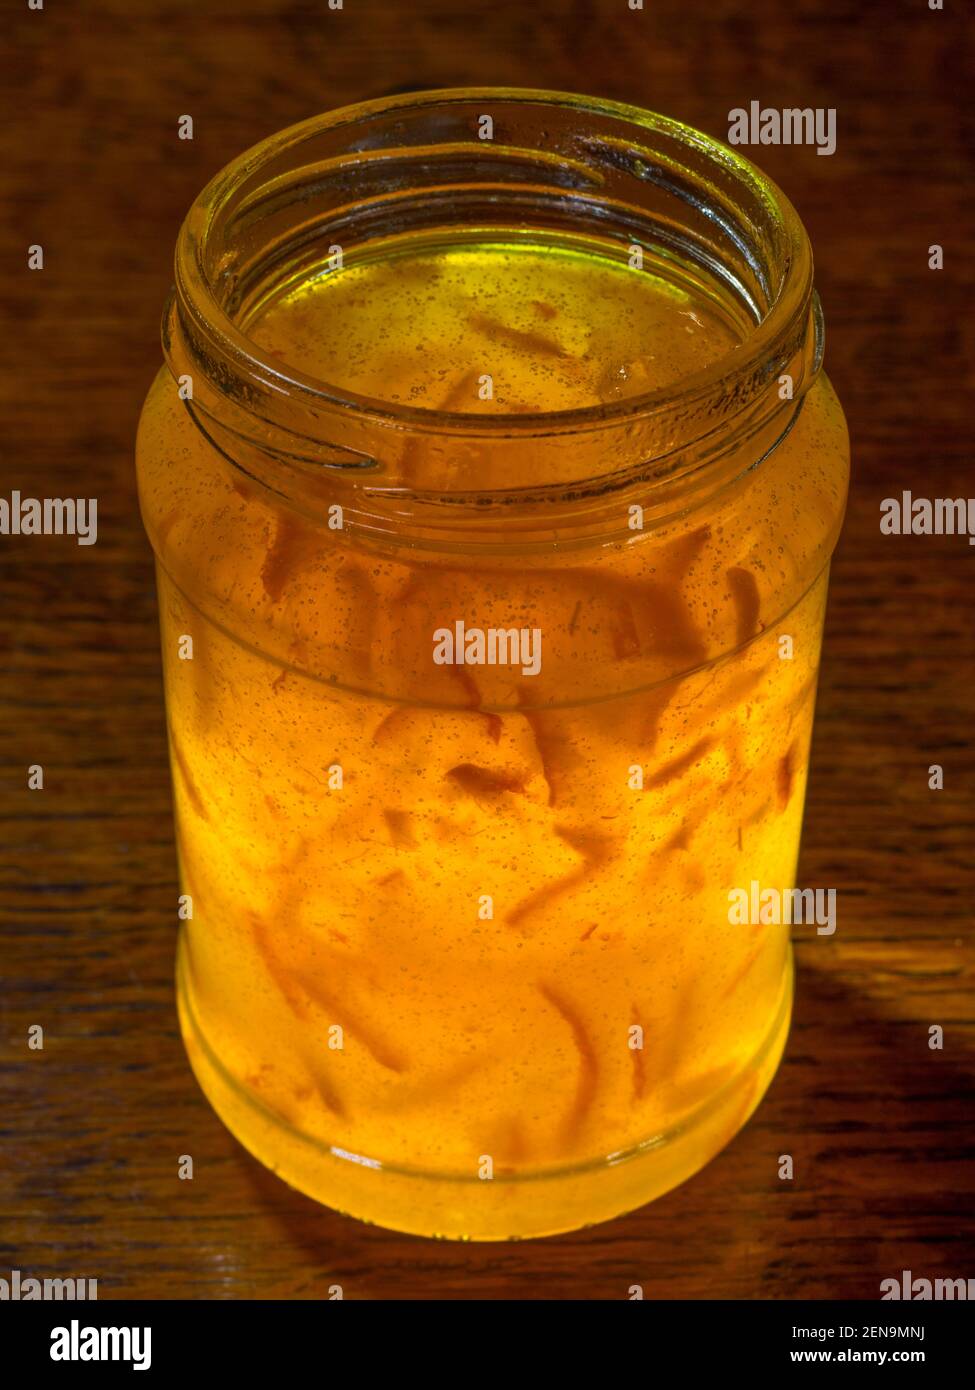 Closeup of a newly opened jar of unbranded, traditional Seville, orange fruit and peel marmalade preserve, with the lid removed. Stock Photo